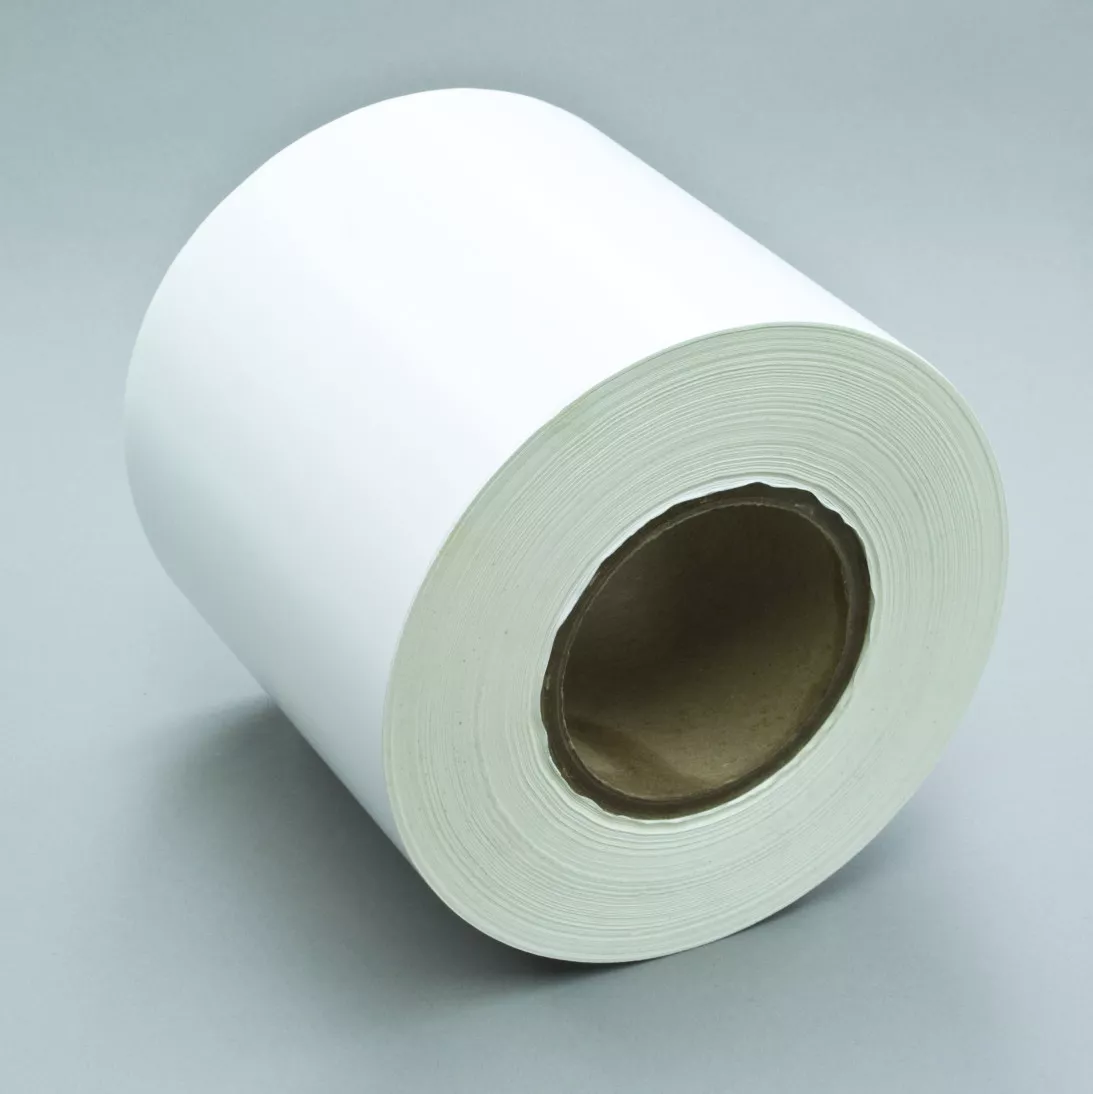 3M™ Thermal Transfer Label Material OFV0202, Soft White Vinyl, 6 in x
1668 ft, 1 roll per case